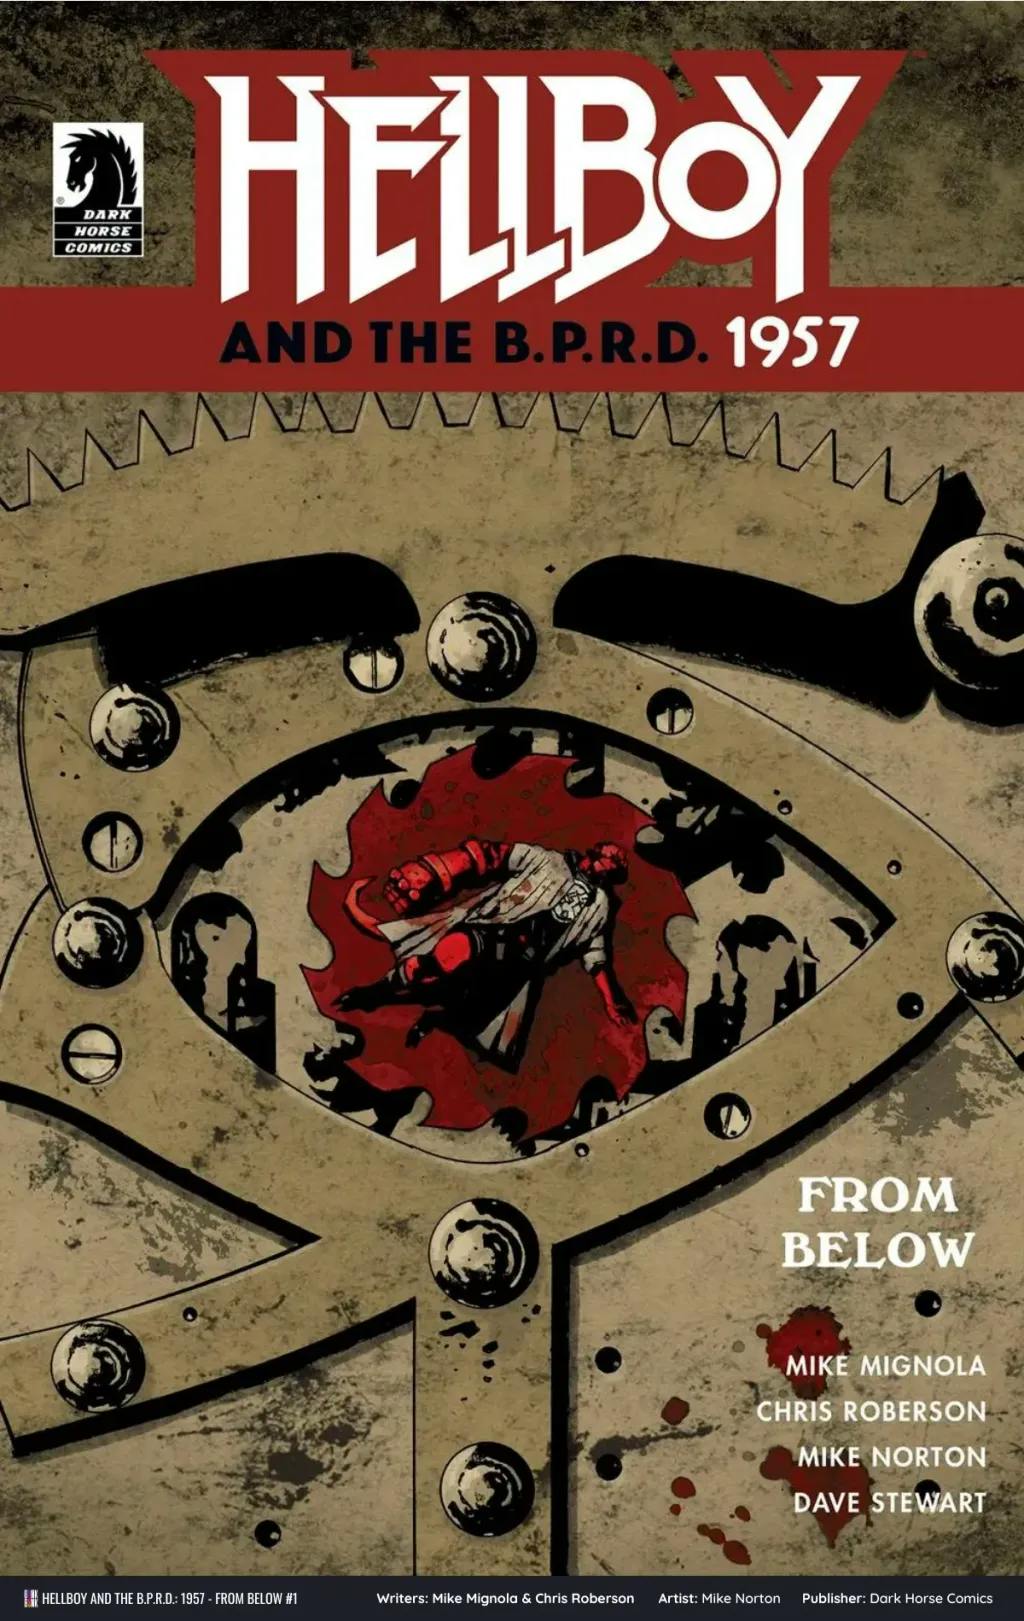 Hellboy and the B.P.R.D. 1957 - From Below #1 Cover